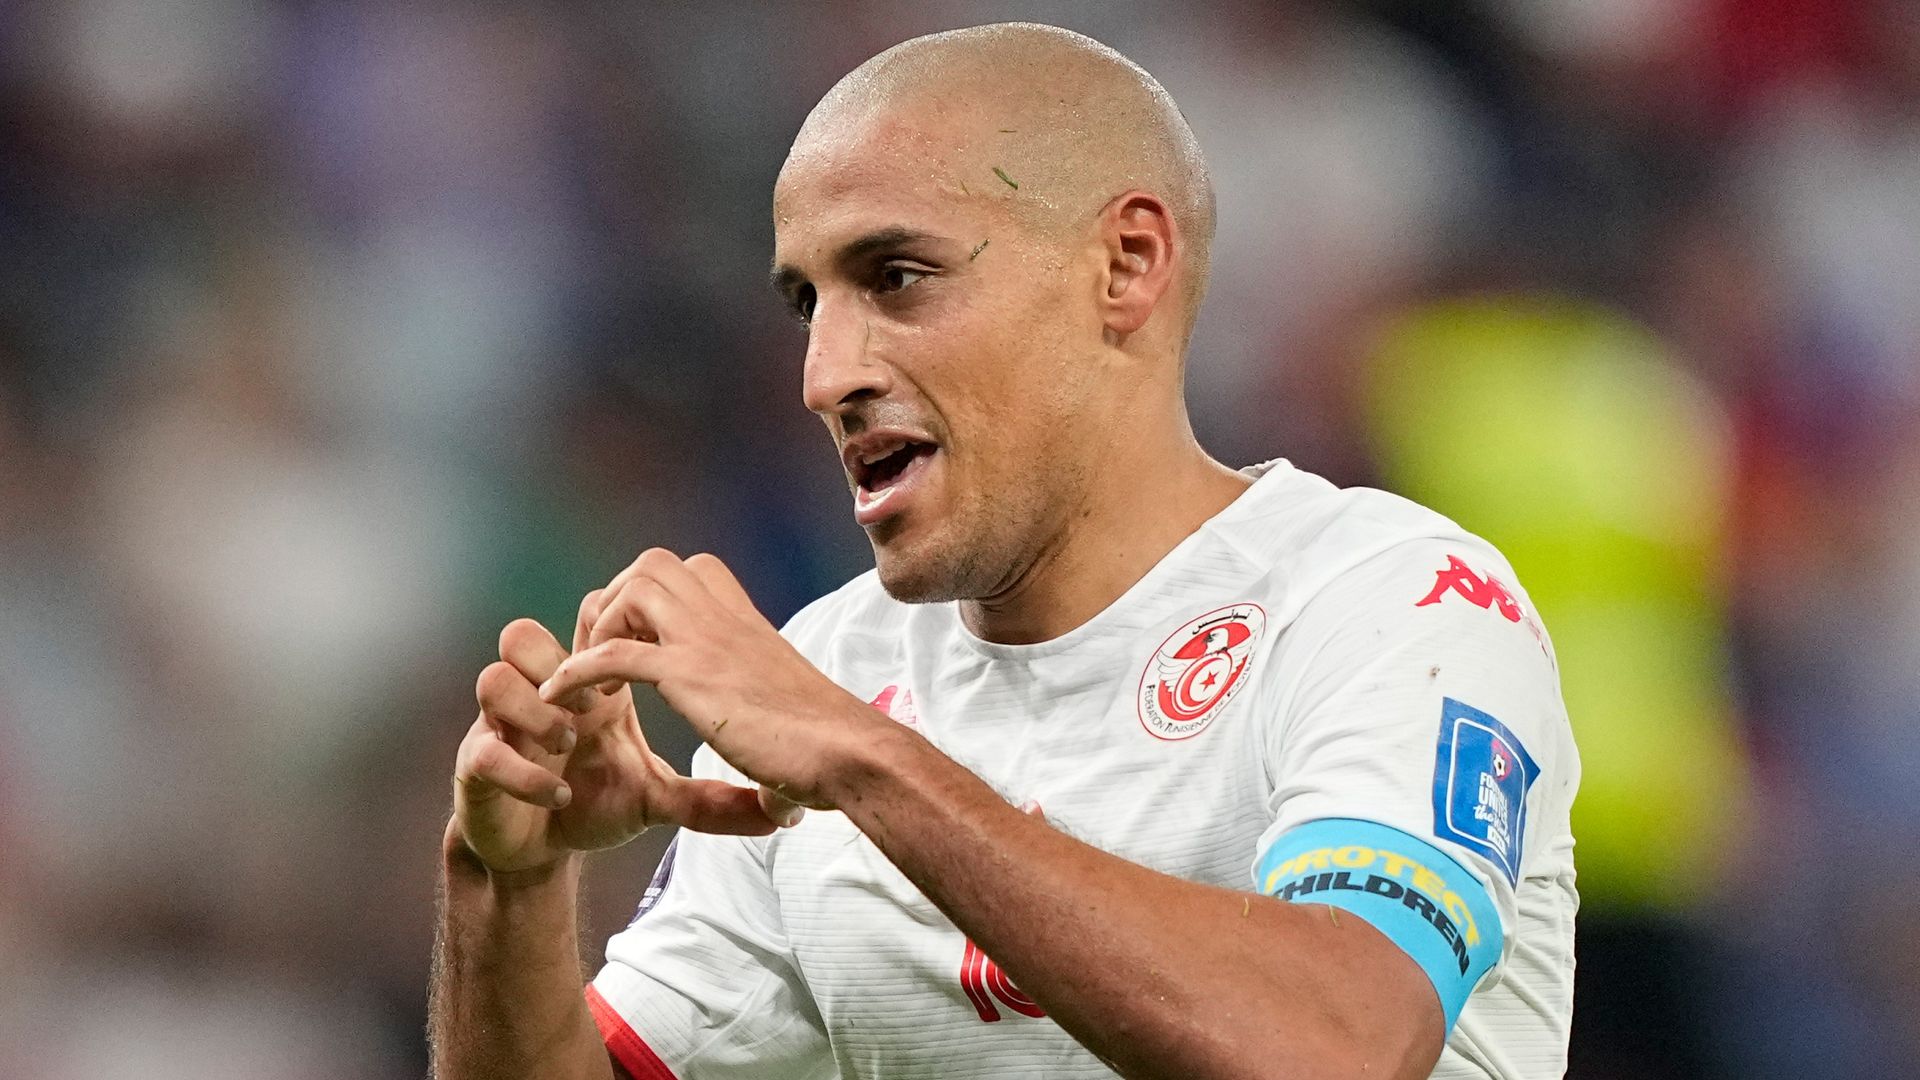 Tunisia shock France as Griezmann's late goal ruled out by VAR